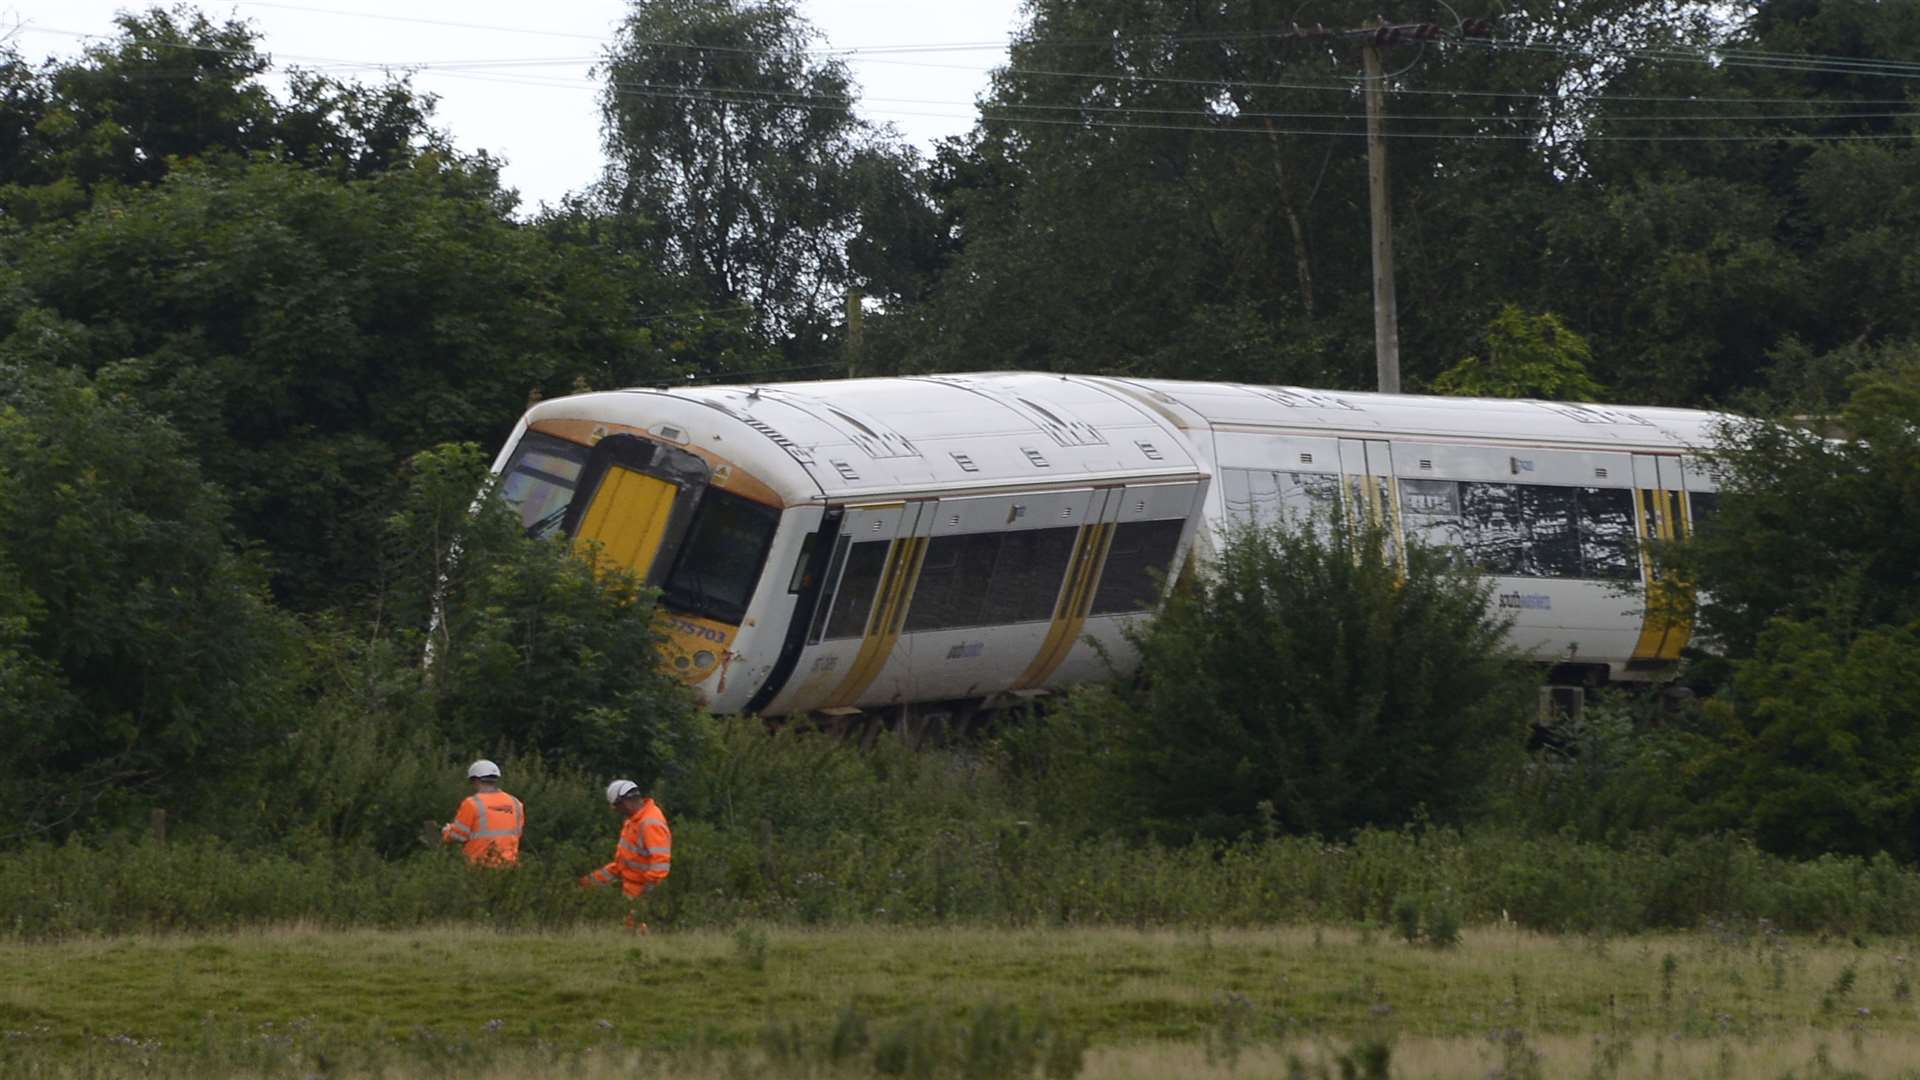 Network Rail is working to remove the derailed train